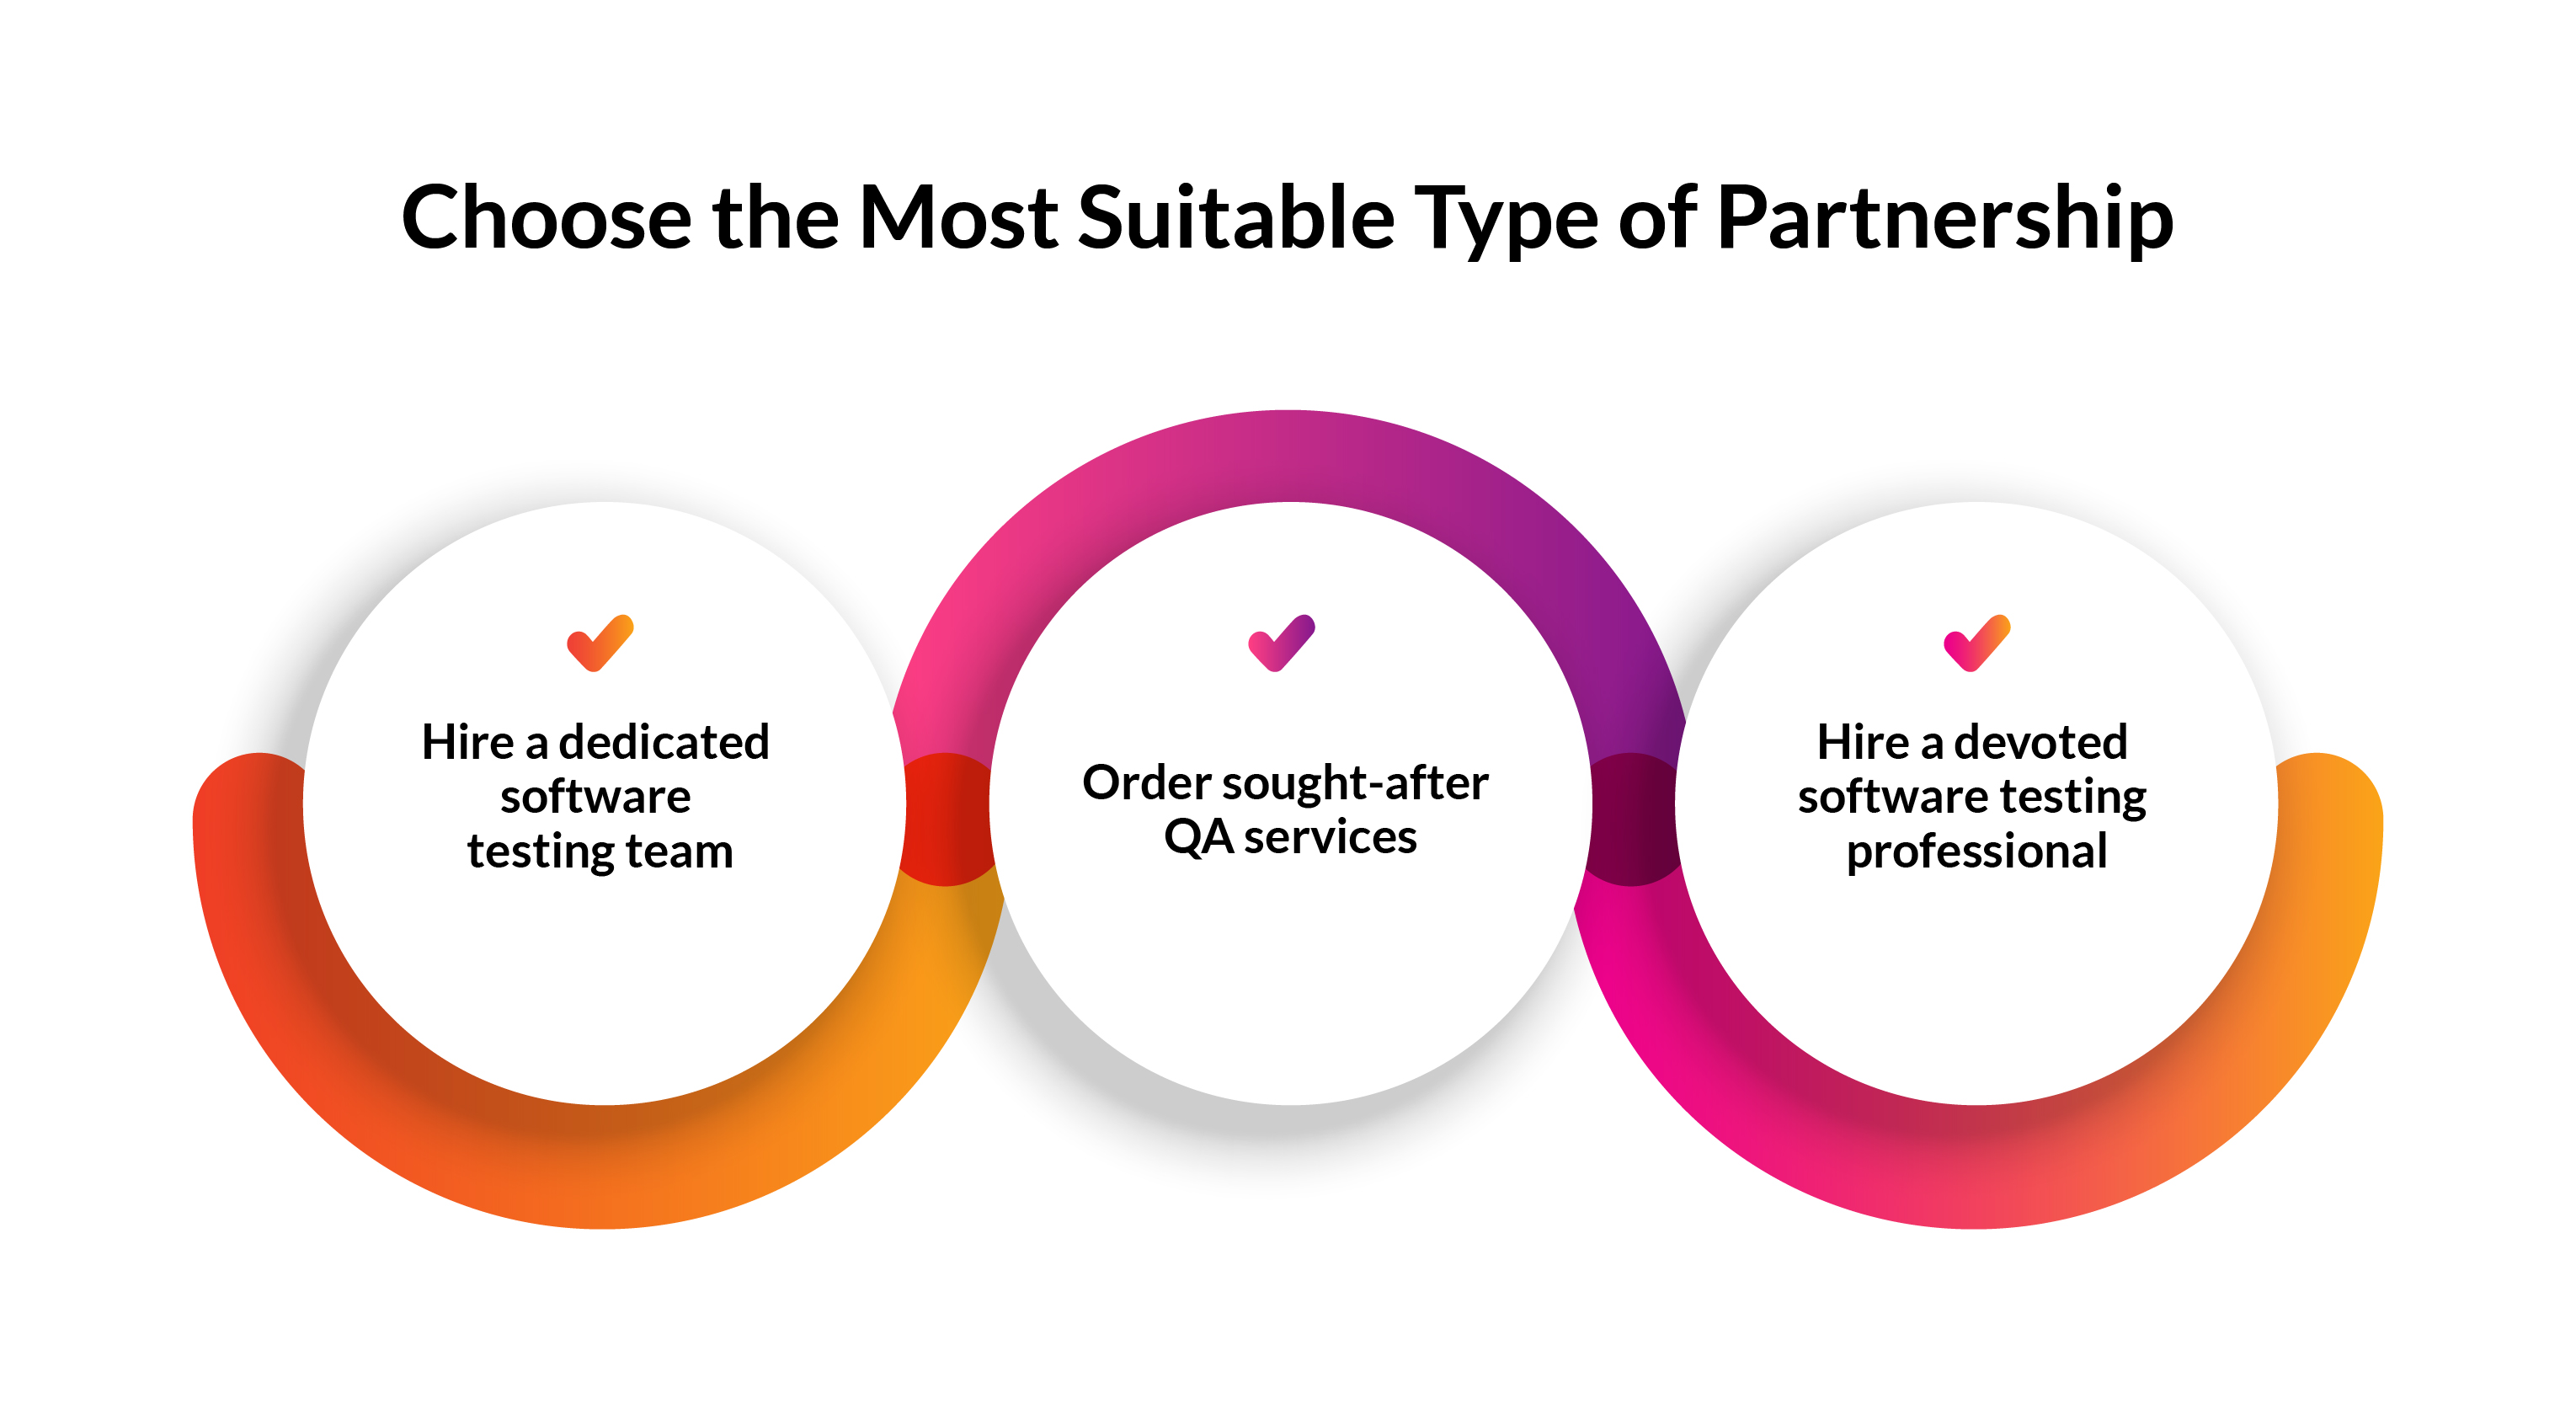 Choose the Most Suitable Type of Partnership